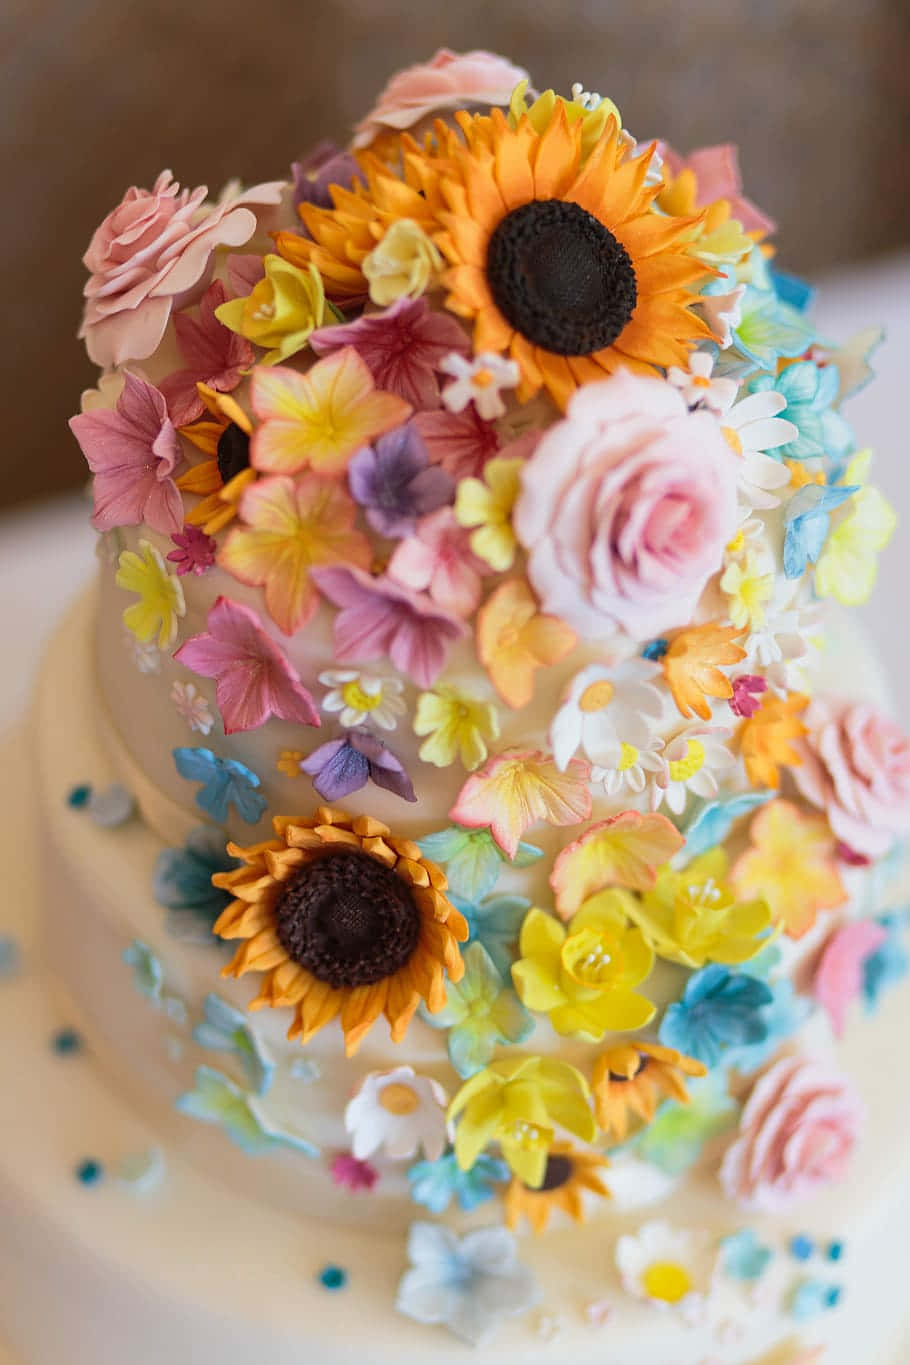 Stunning Floral Cake Delicately Adorned with Fresh Flowers Wallpaper